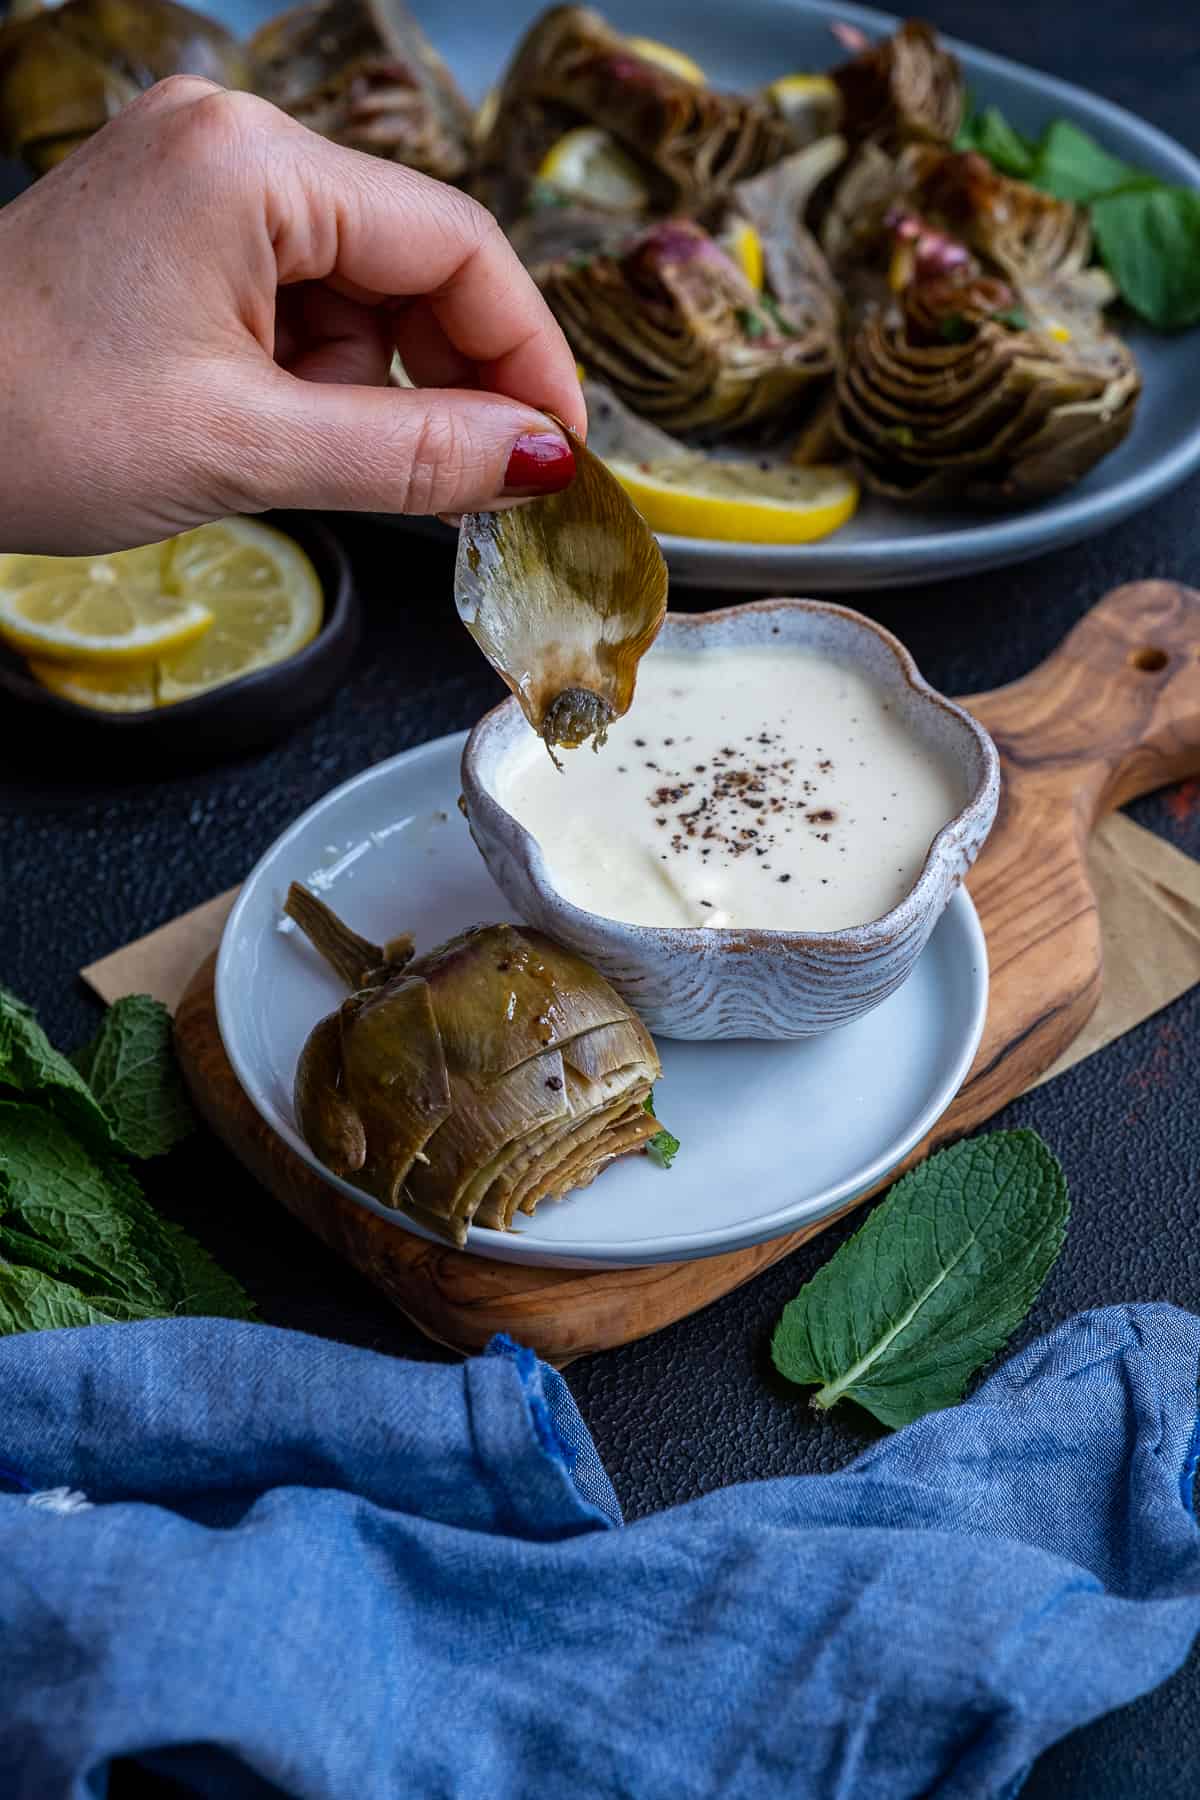 Woman hand about to dip a leaf of a steamed artichoke into a yogurt and mayonnaise dipping sauce.